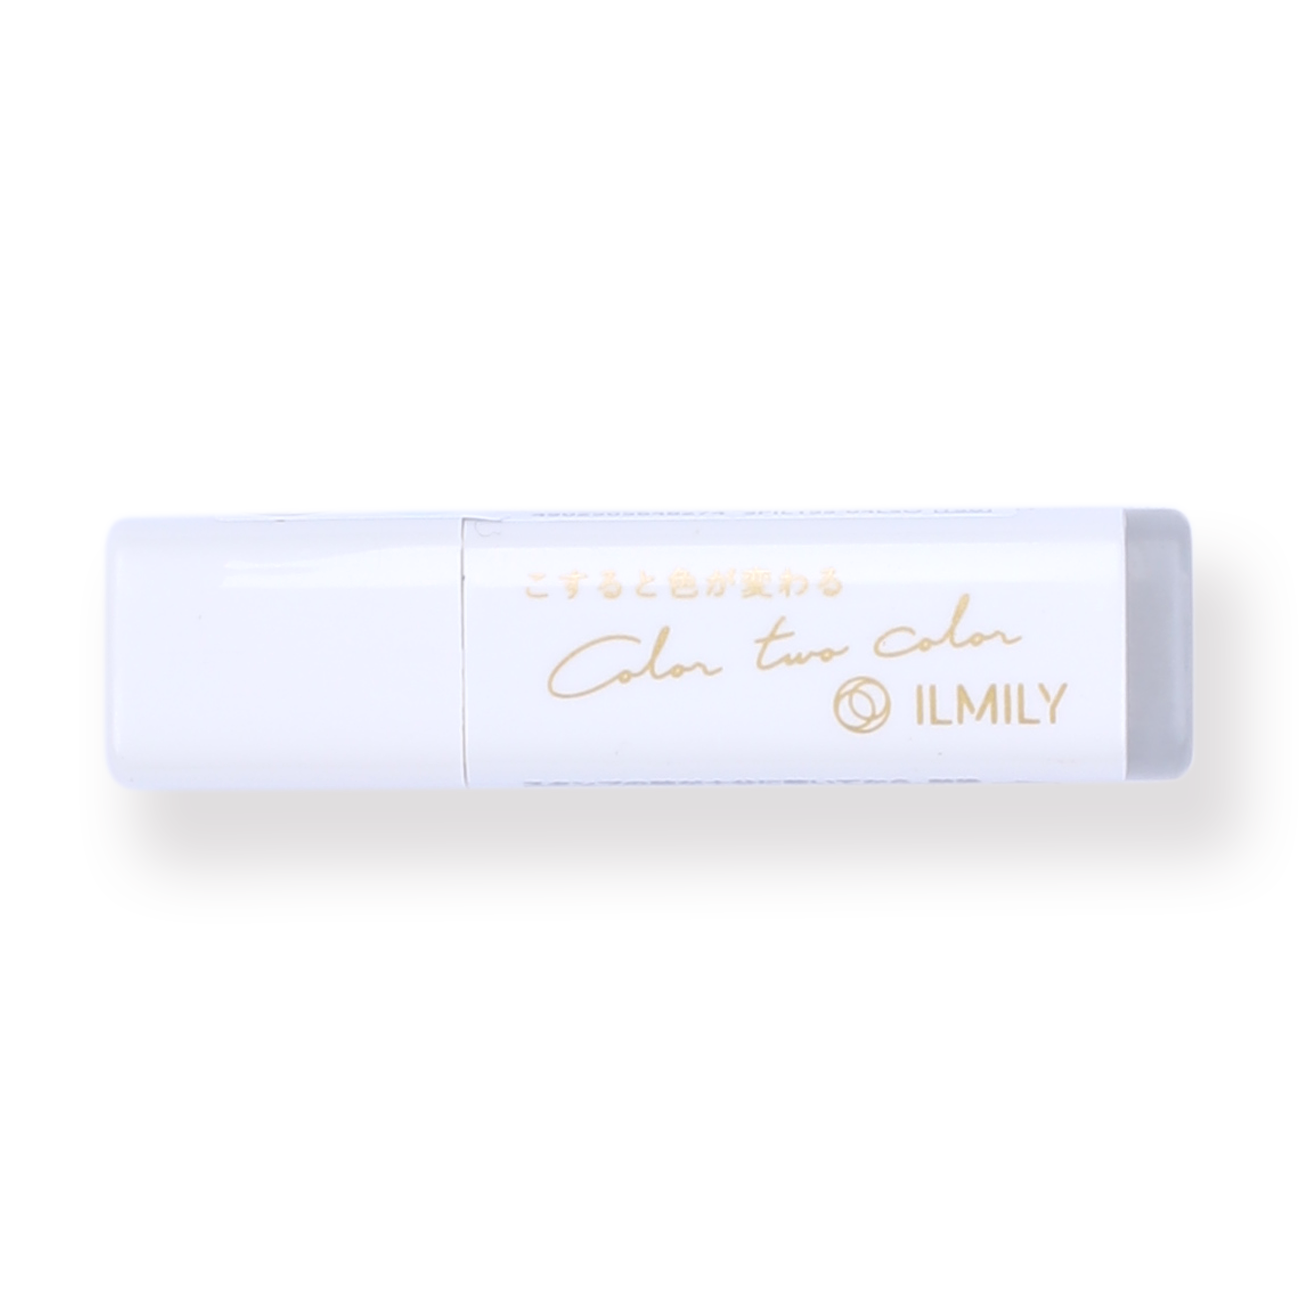 Pilot ILMILY Limited Edition Erasable Stamp - Music Note